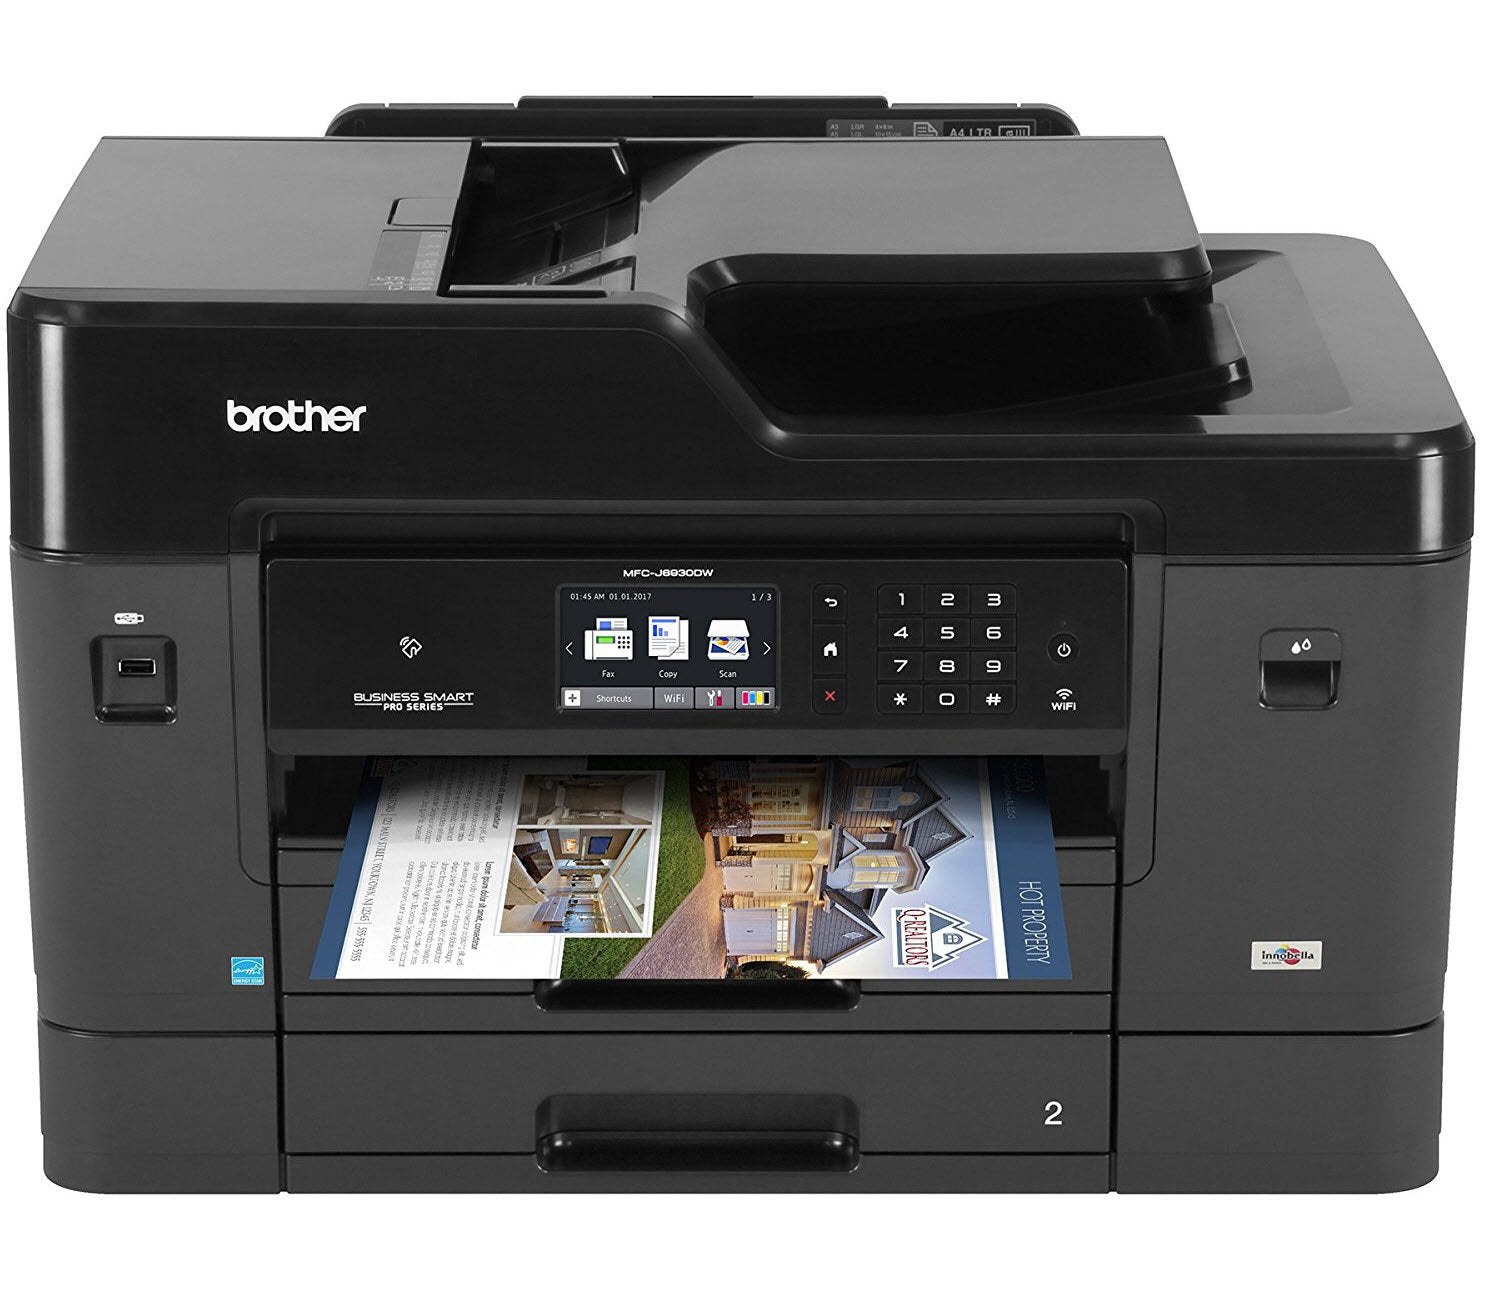 Brother Printer MFCJ6930DW Wireless Color Inkjet Printer with Scanner, Copier & Fax